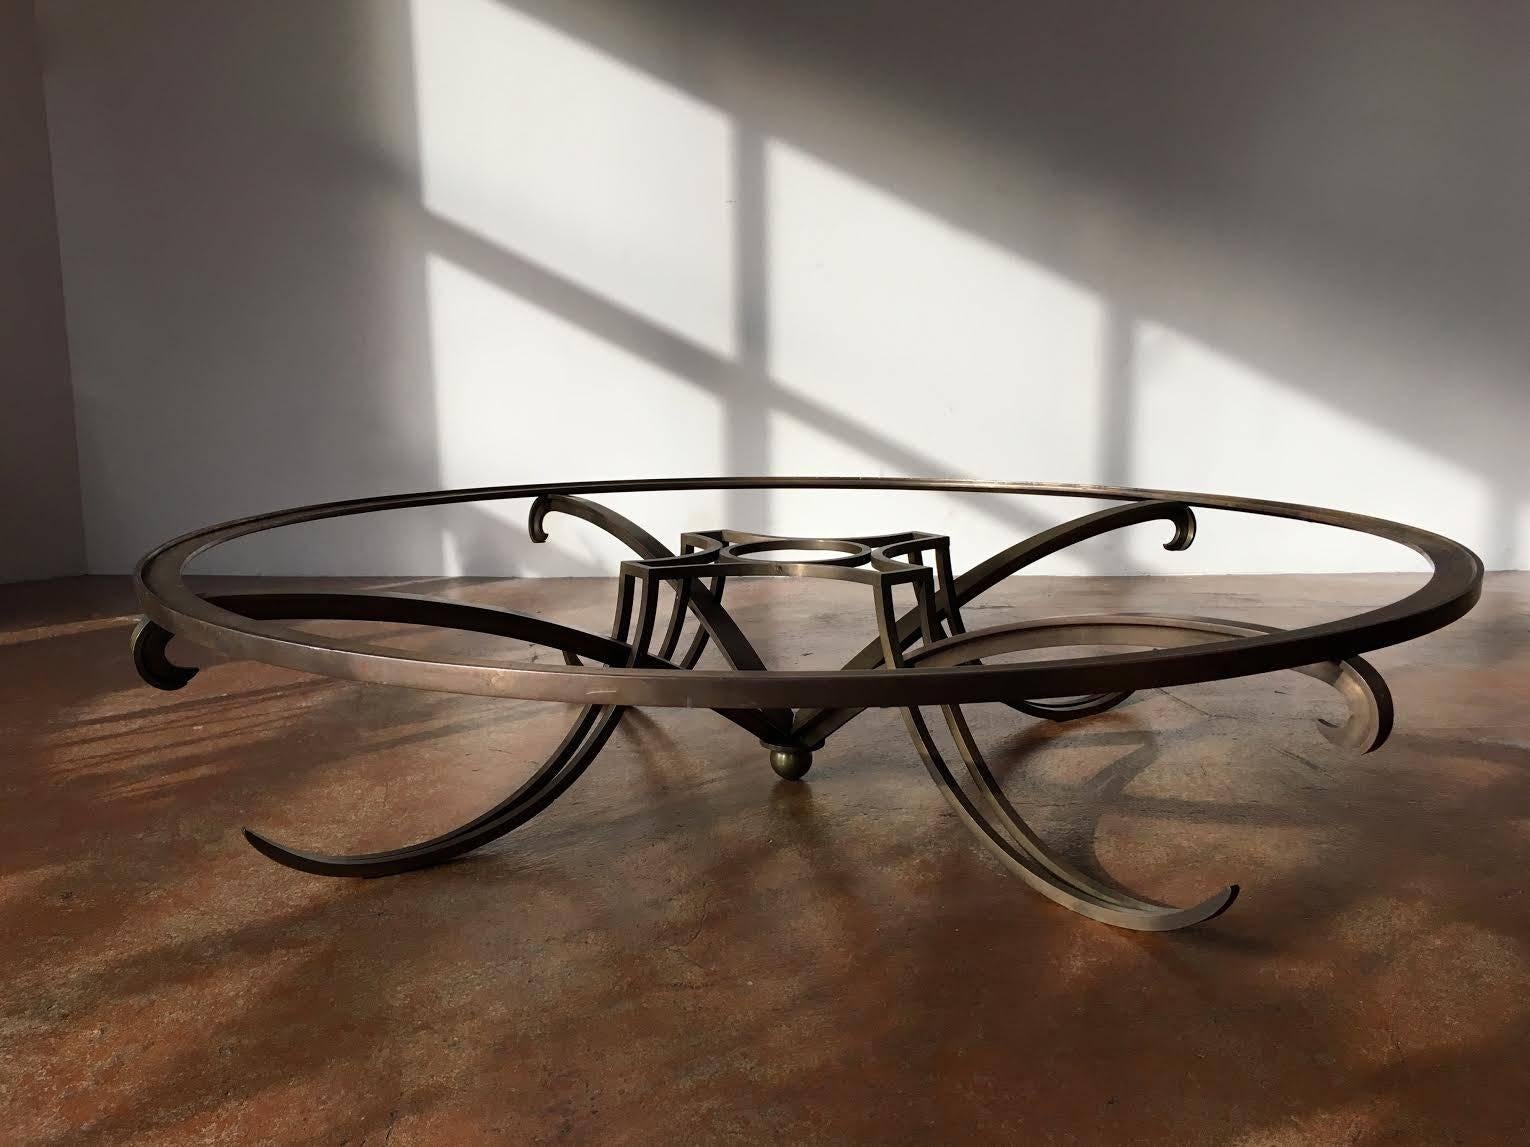 Bronze Stunning Arturo Pani, Solid Brass Sculptural Coffee Table, Mexico City, 1950